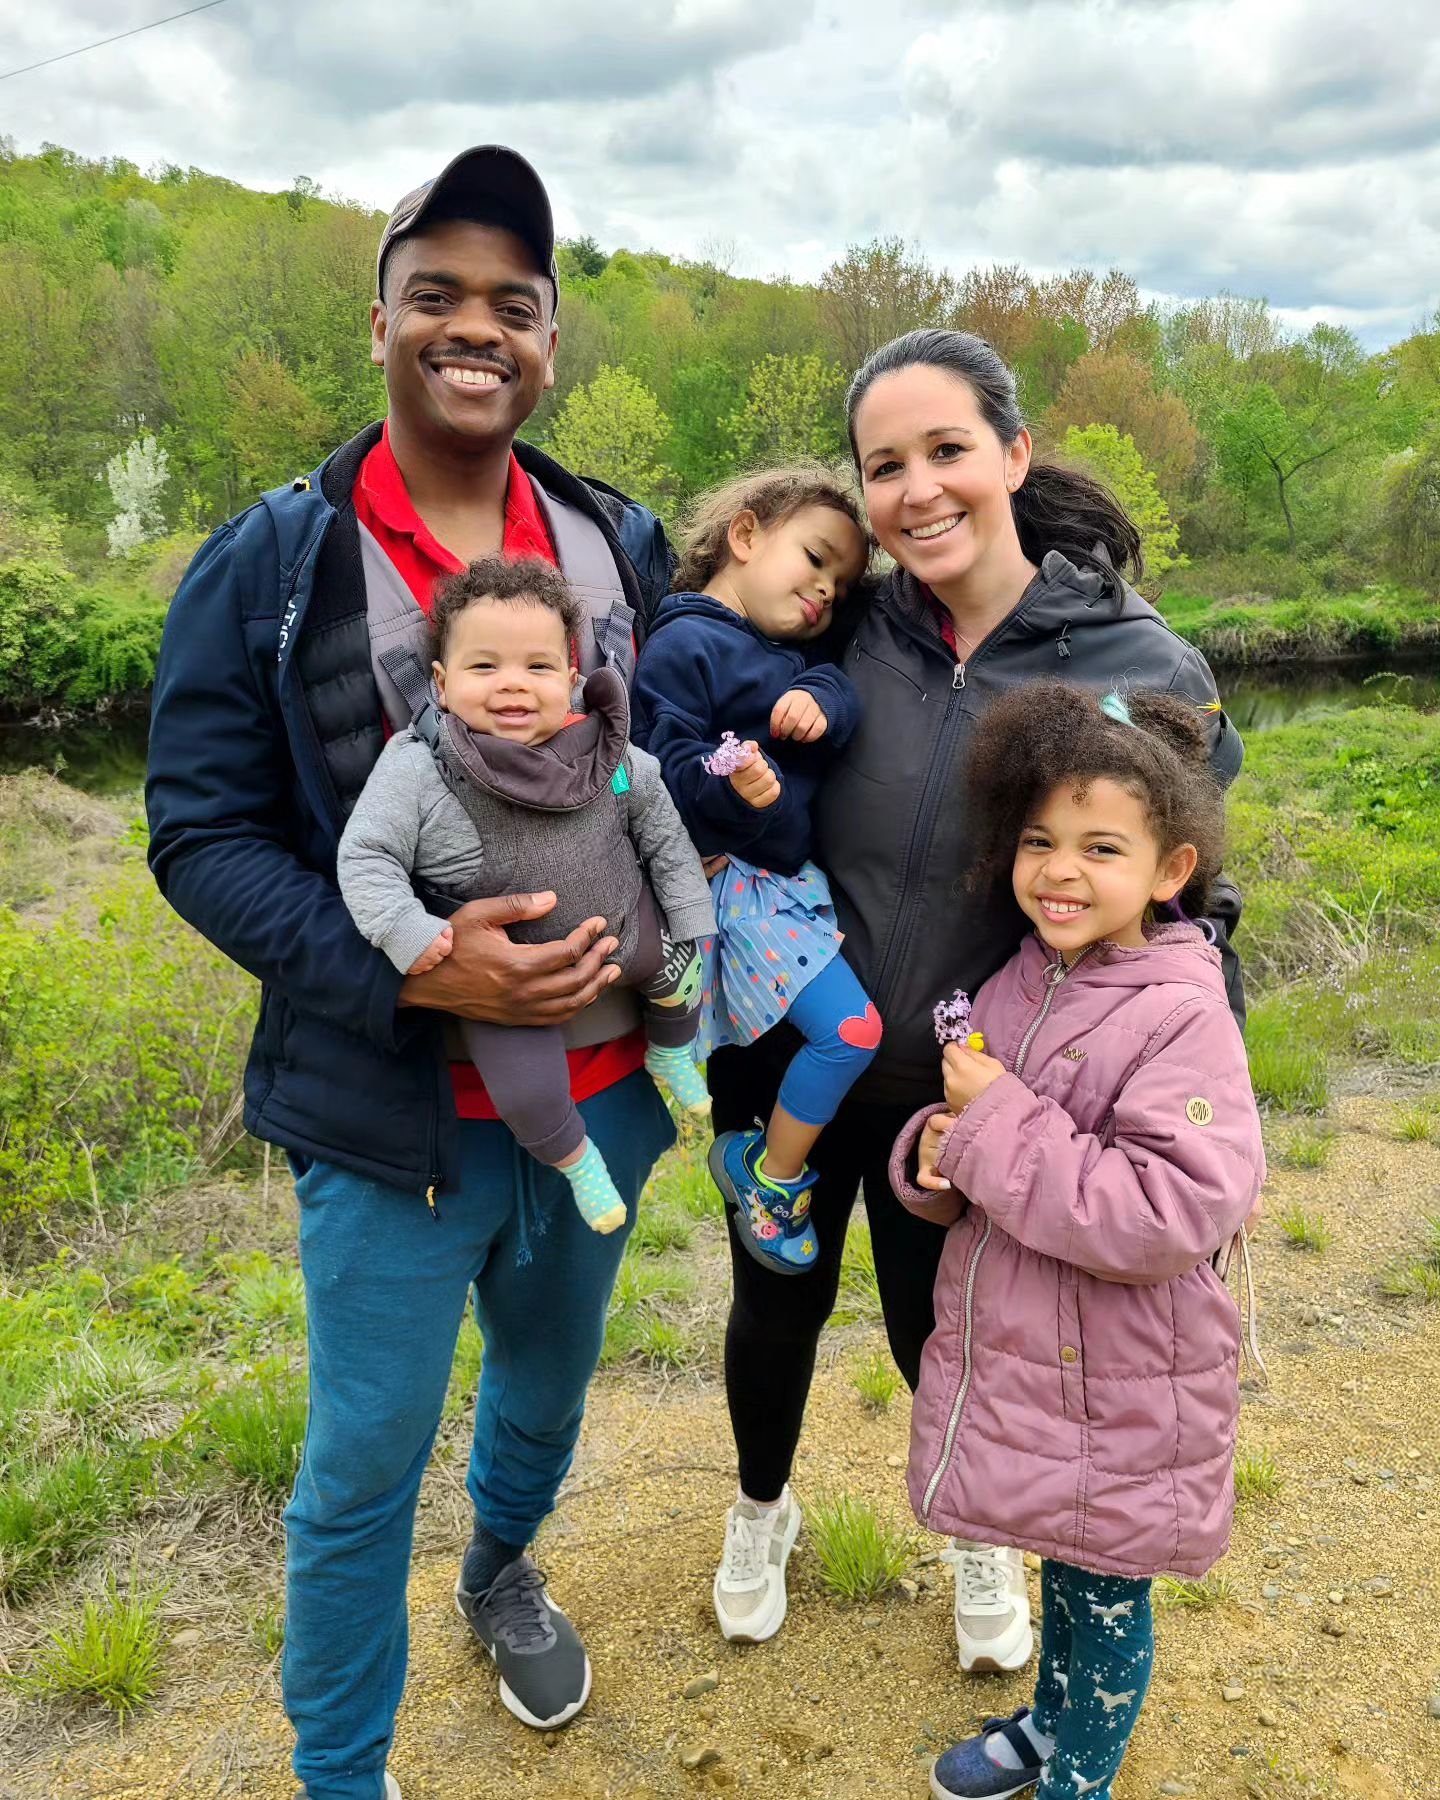 First year as a mama of 3 and a walk in nature felt right today ❤️

Happy Mother's Day to all the women who have made us who we are today, whether you birthed us or not.

Sending love to the ones feeling joy and especially to the ones feeling pain. T